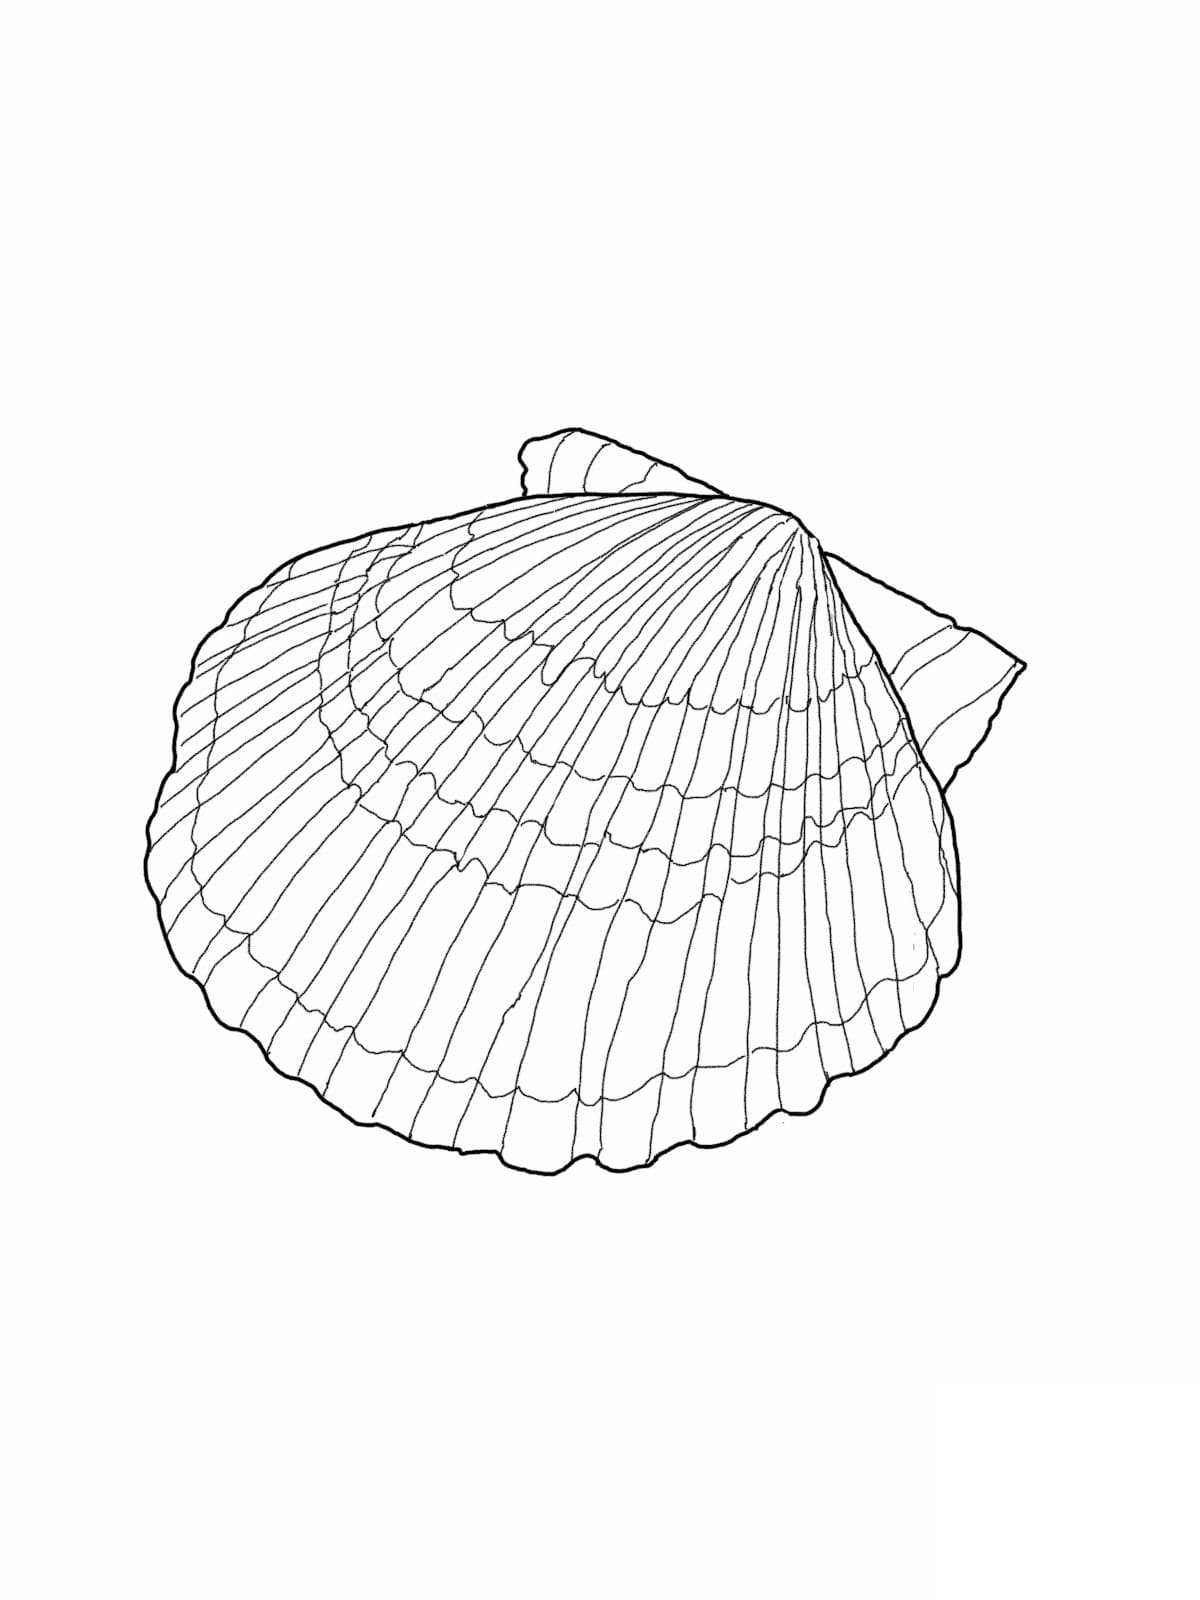 Printable Seashell Cute Image For Children Coloring Page